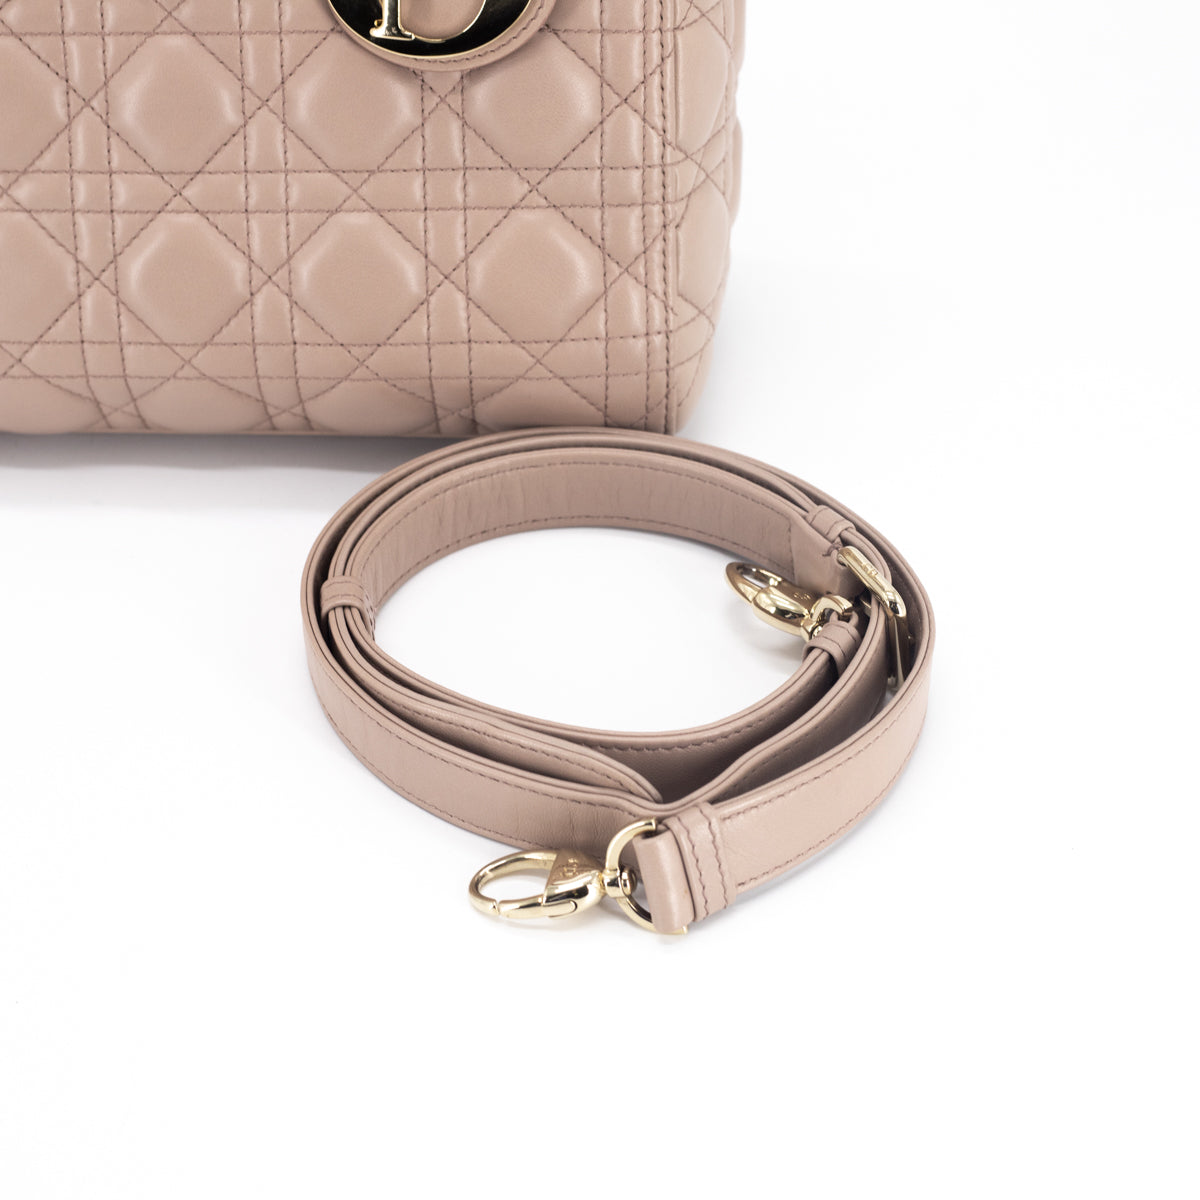 Lady DJoy Micro Bag Rose Des Vents Cannage Lambskin  DIOR